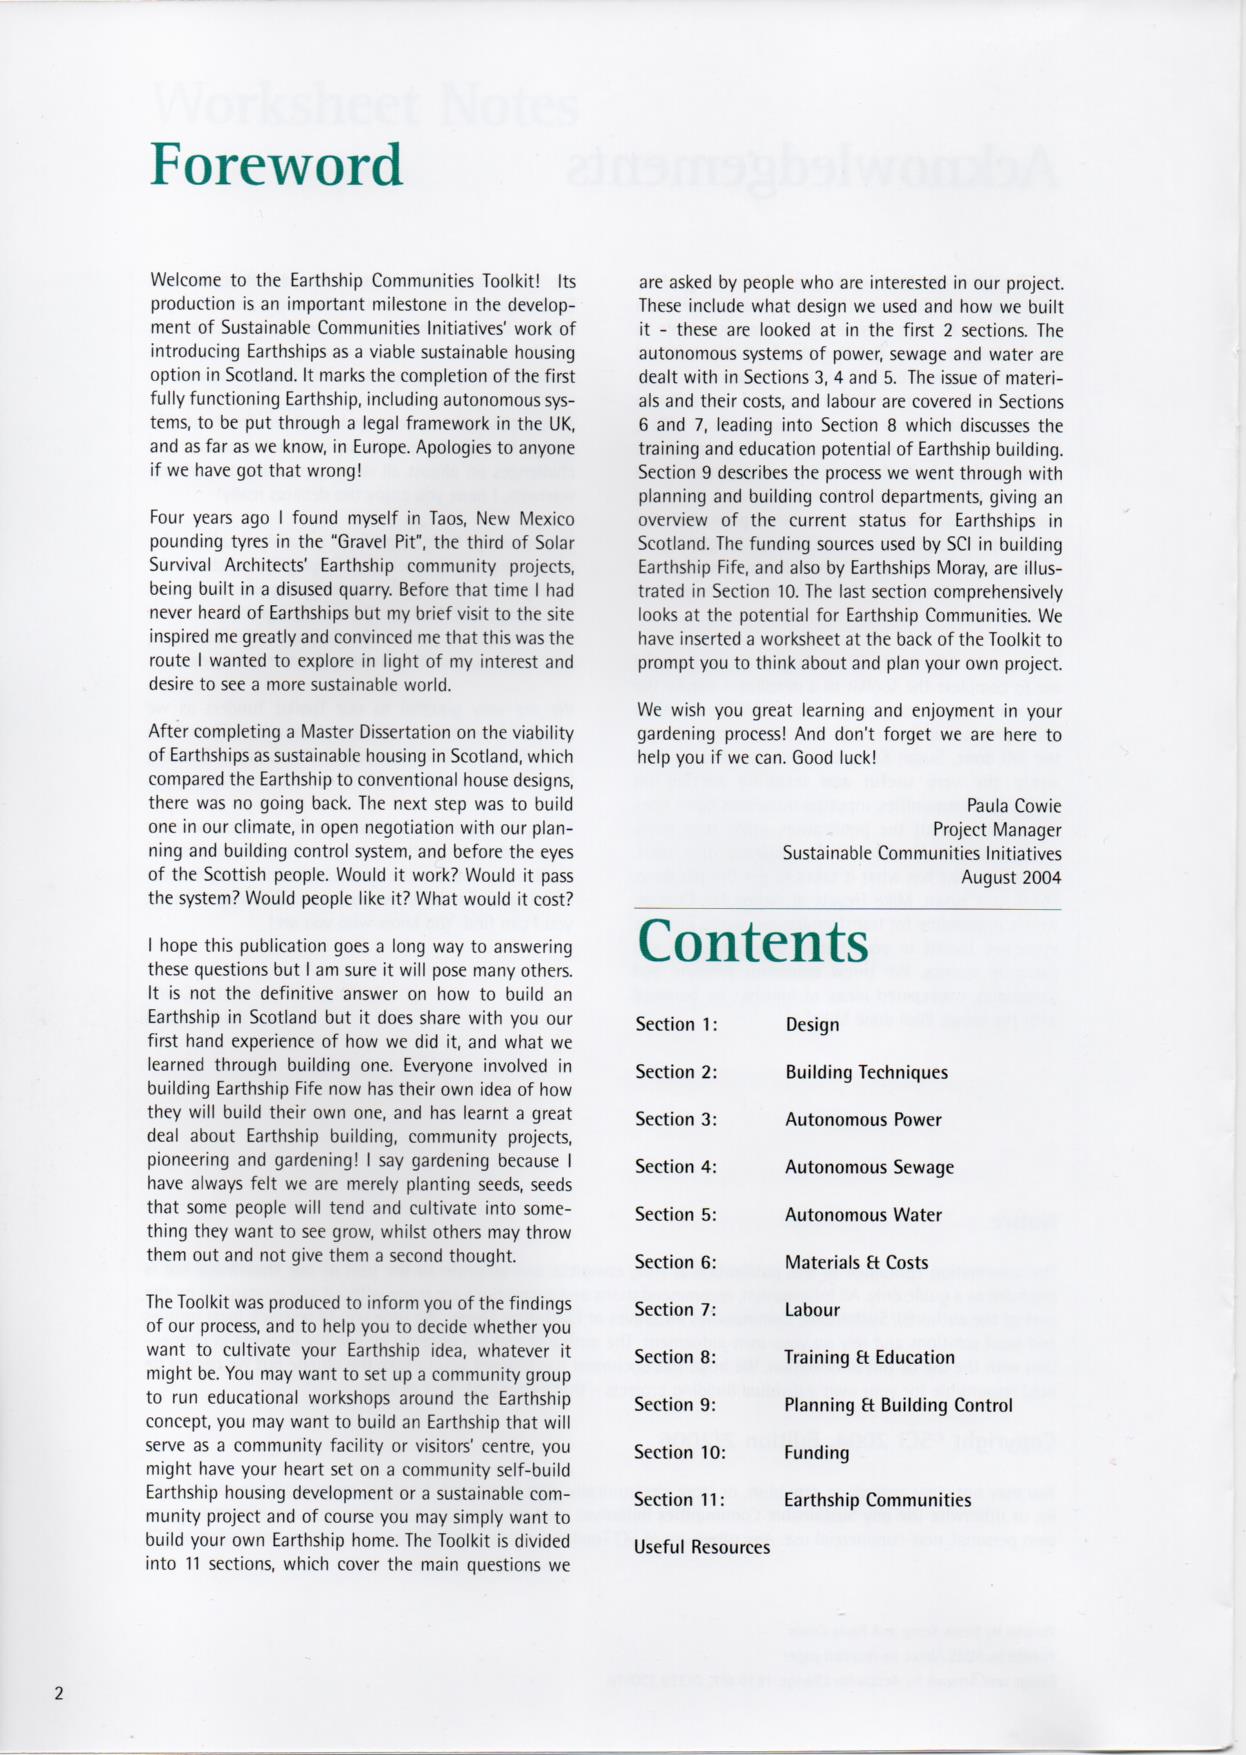 Scan of the Foreword page from the Earthship Toolkit